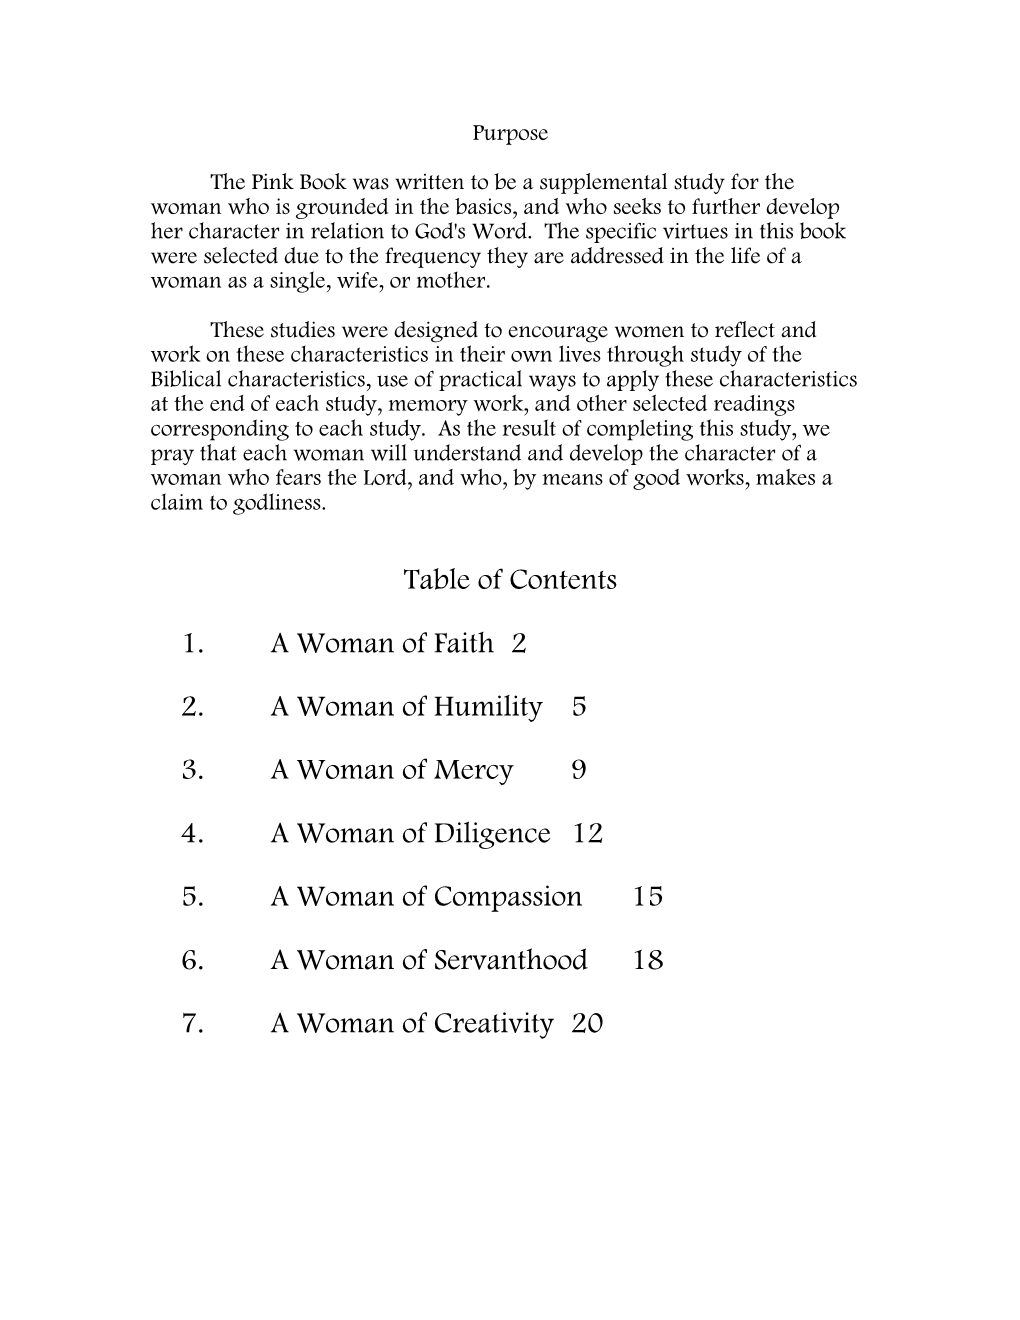 Table of Contents 1. a Woman of Faith 2 2. a Woman of Humility 5 3. A